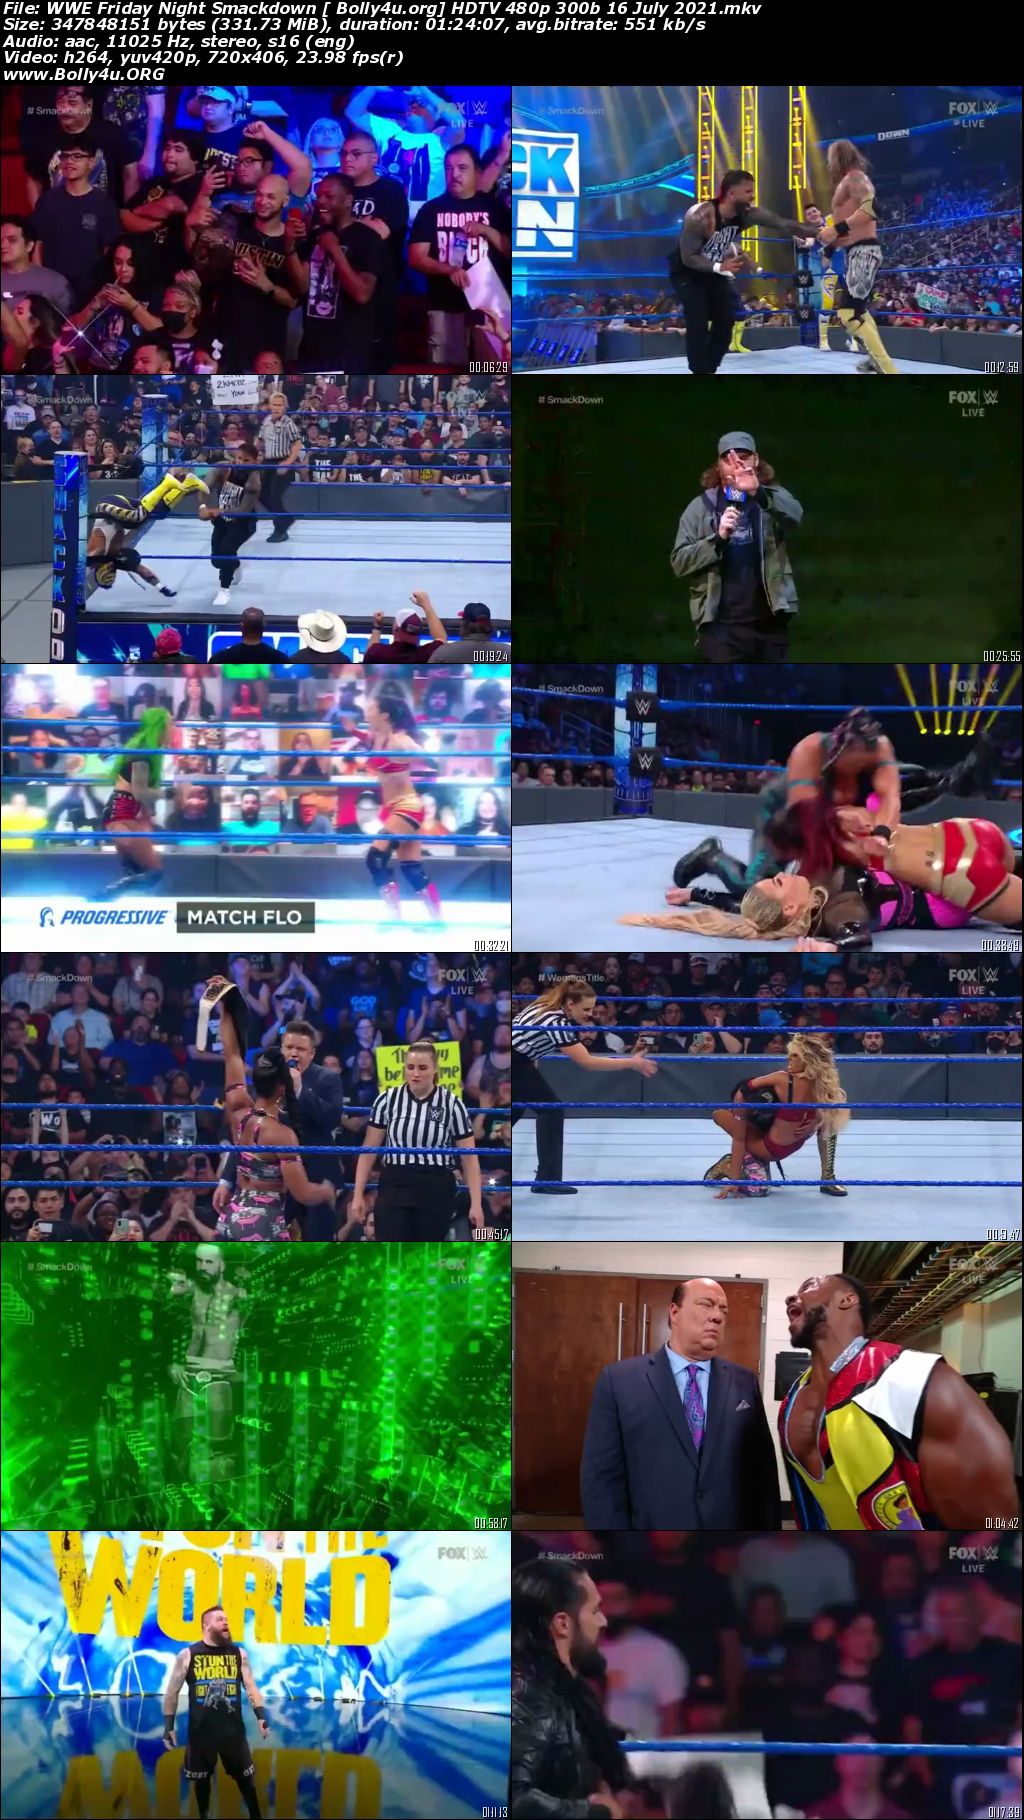 WWE Friday Night Smackdown HDTV 480p 300b 16 July 2021 Download